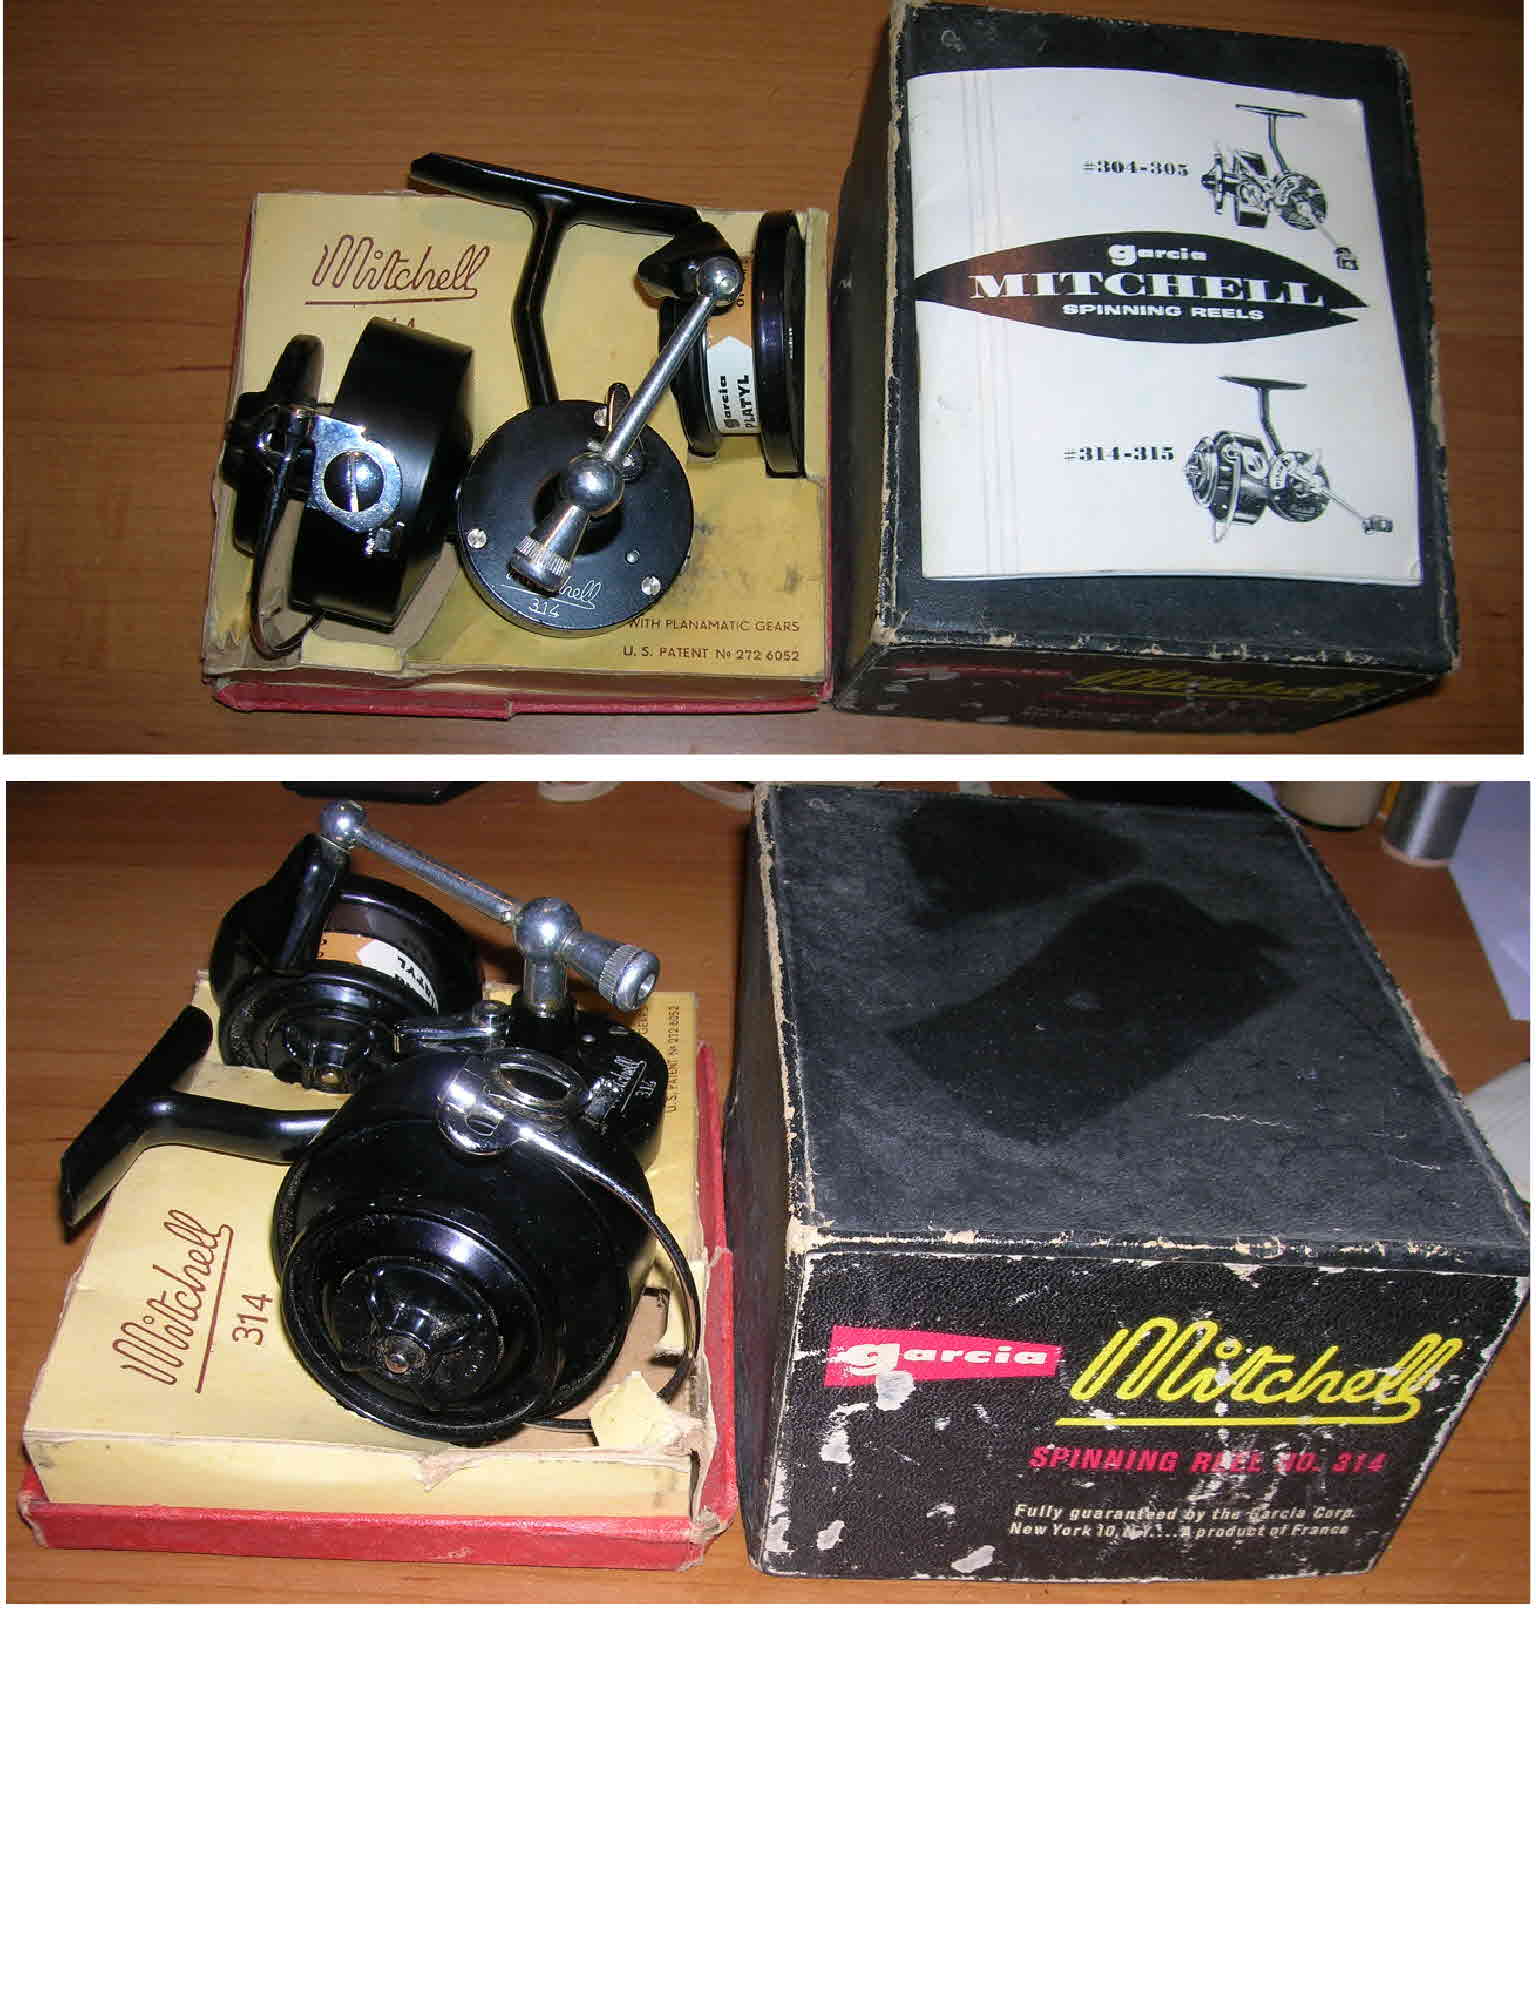 Cabelas RLS4 9-10wt Fly Reel Nice Excellent New Unused Condition in Box 